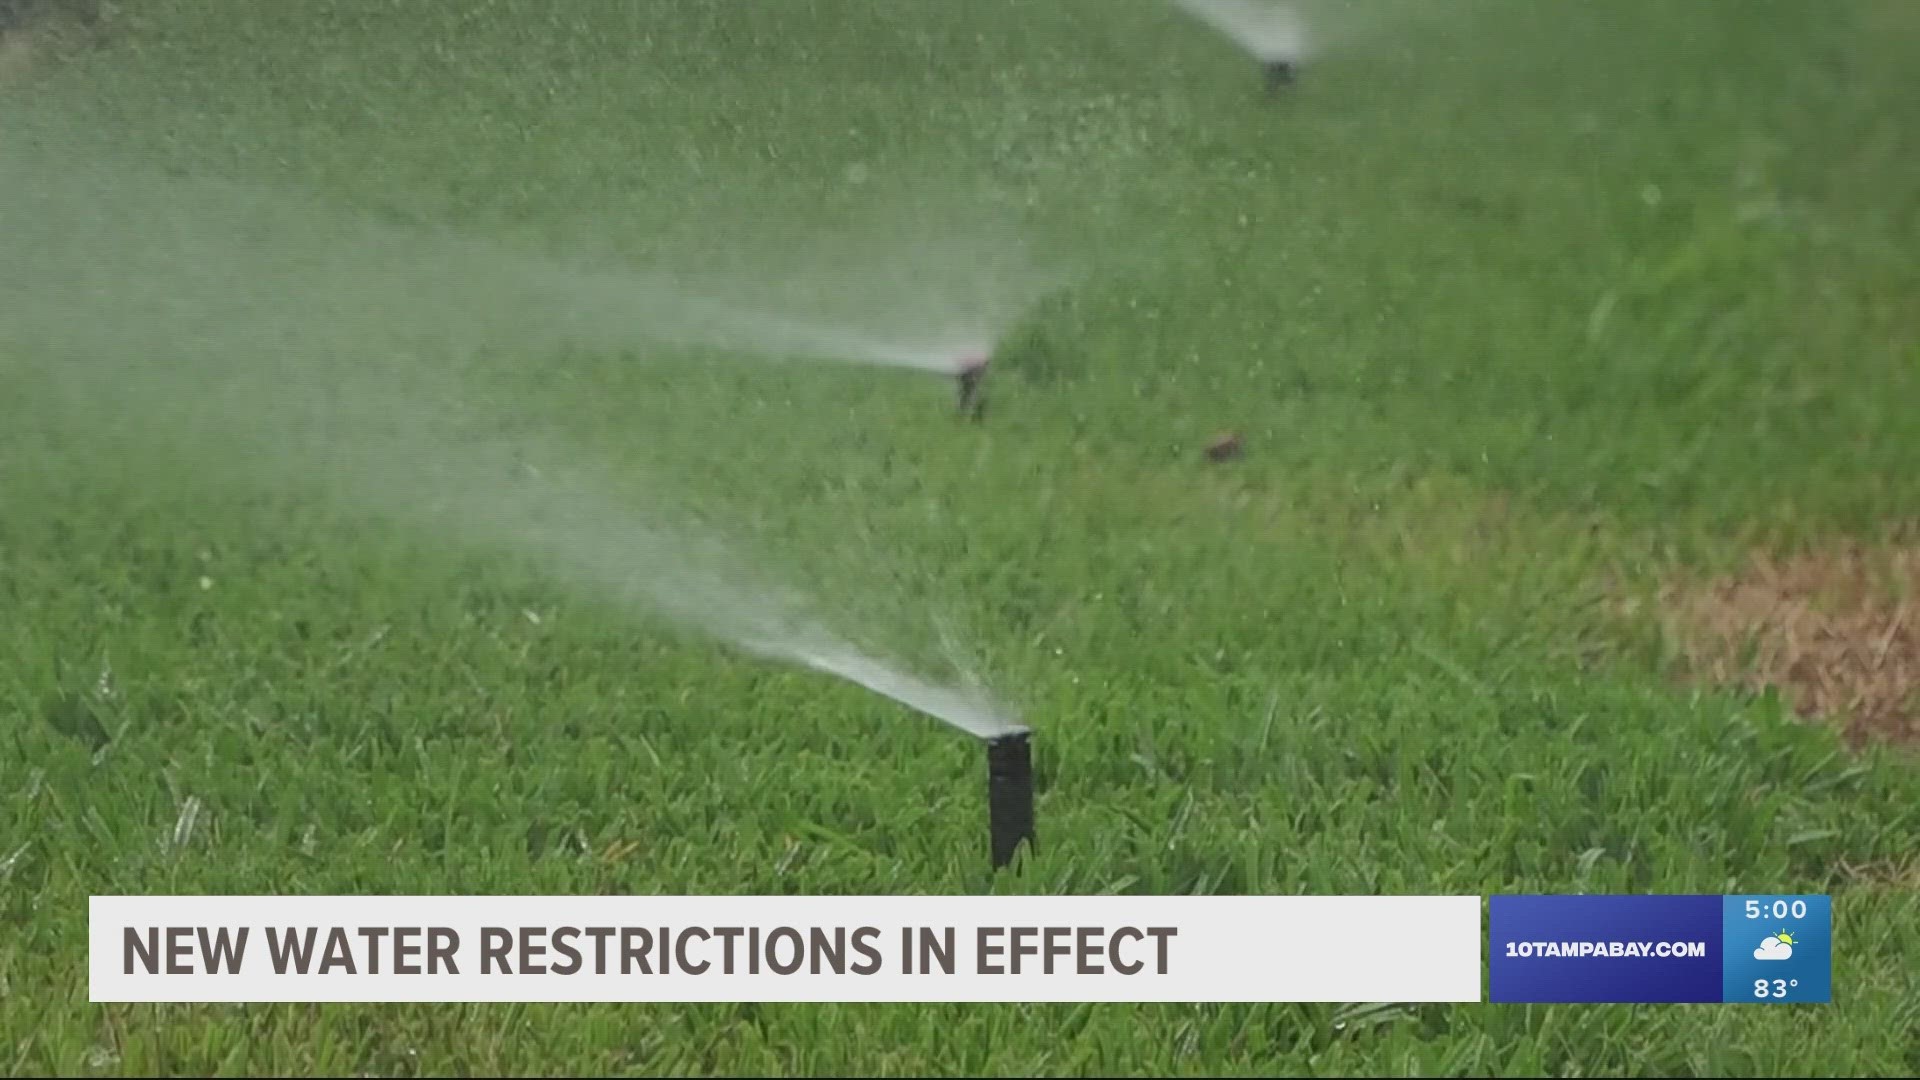 Along with fines, failure to comply with these water restrictions can result in mandatory court appearances.